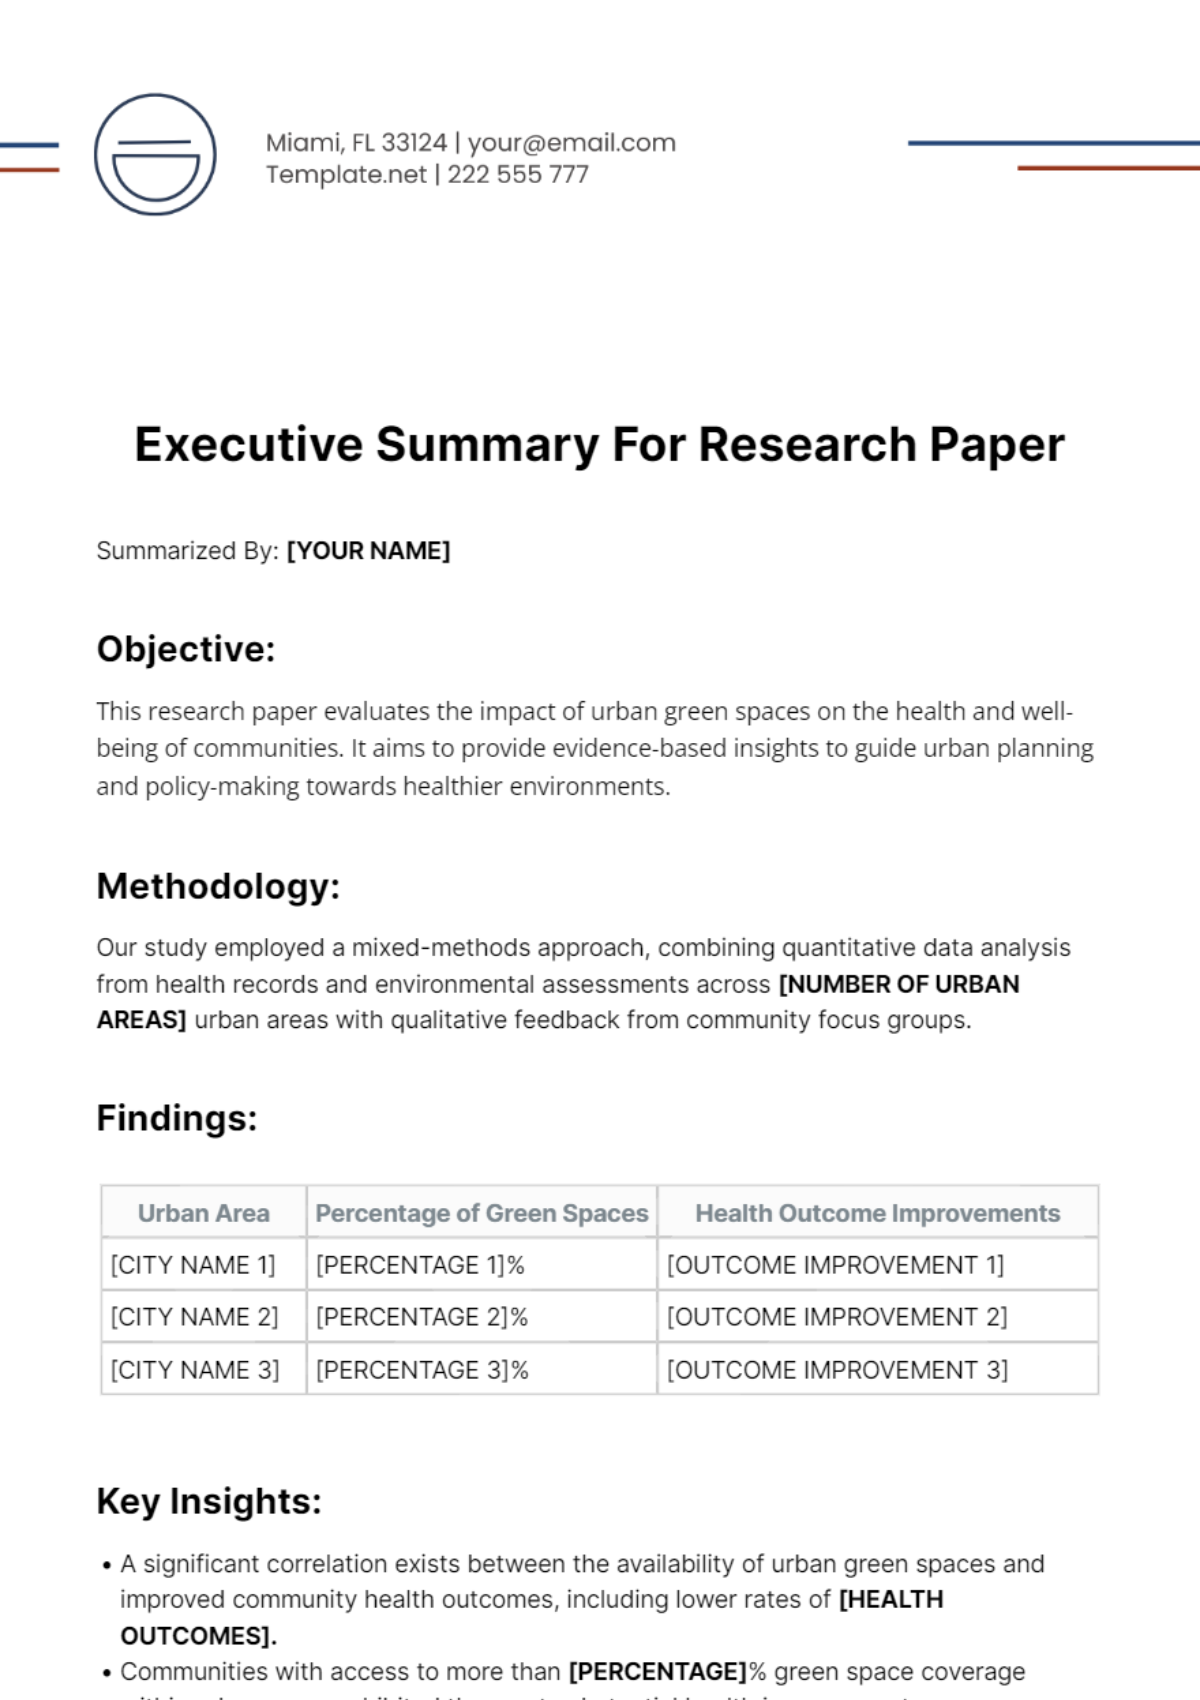 Executive Summary For Research Paper Template